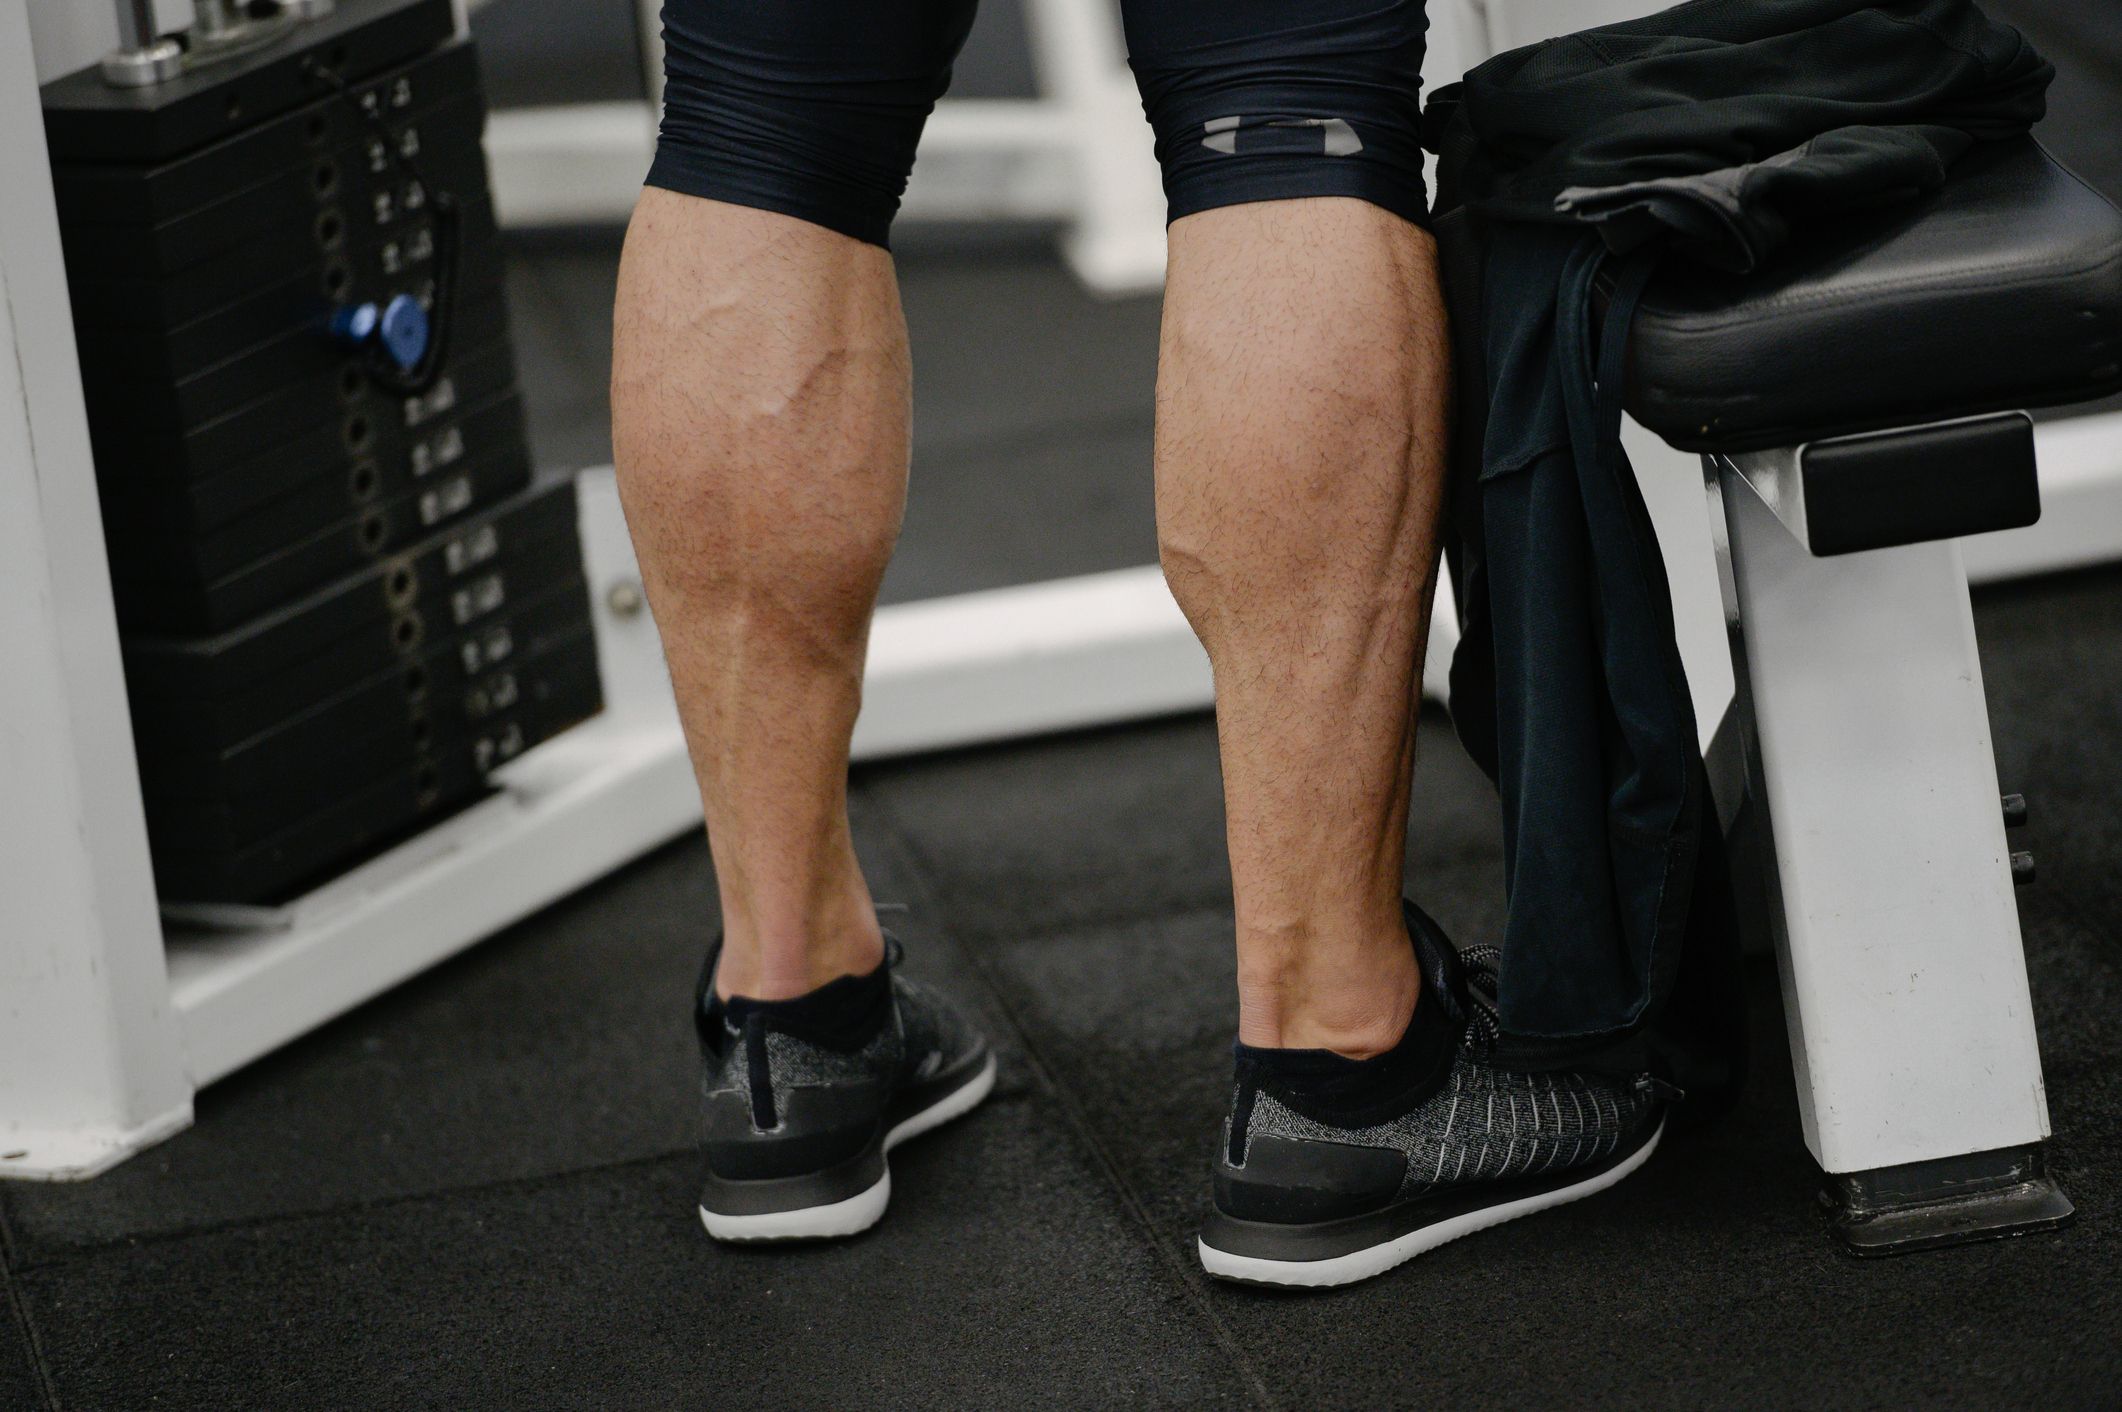 How To Lose Inches On Your Calves - Battlepriority6